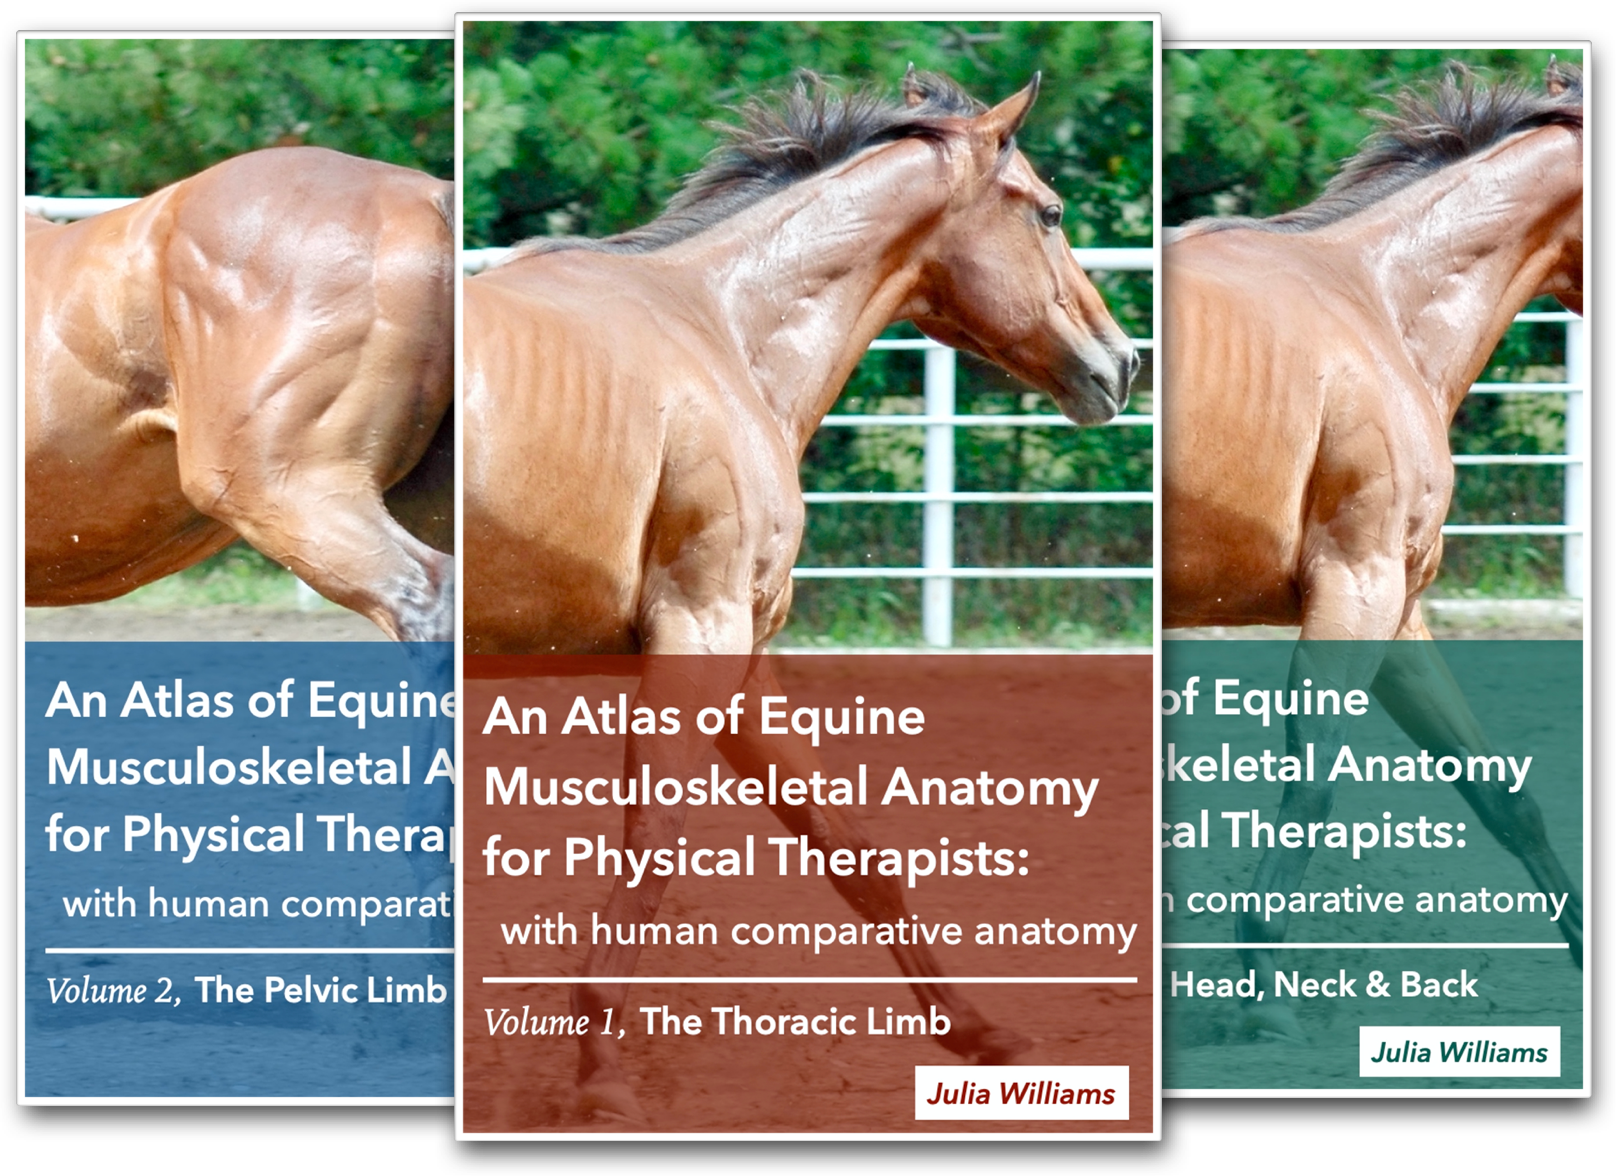 An Atlas of Equine Musculoskeletal Anatomy for Physical Therapists with human comparative anatomy